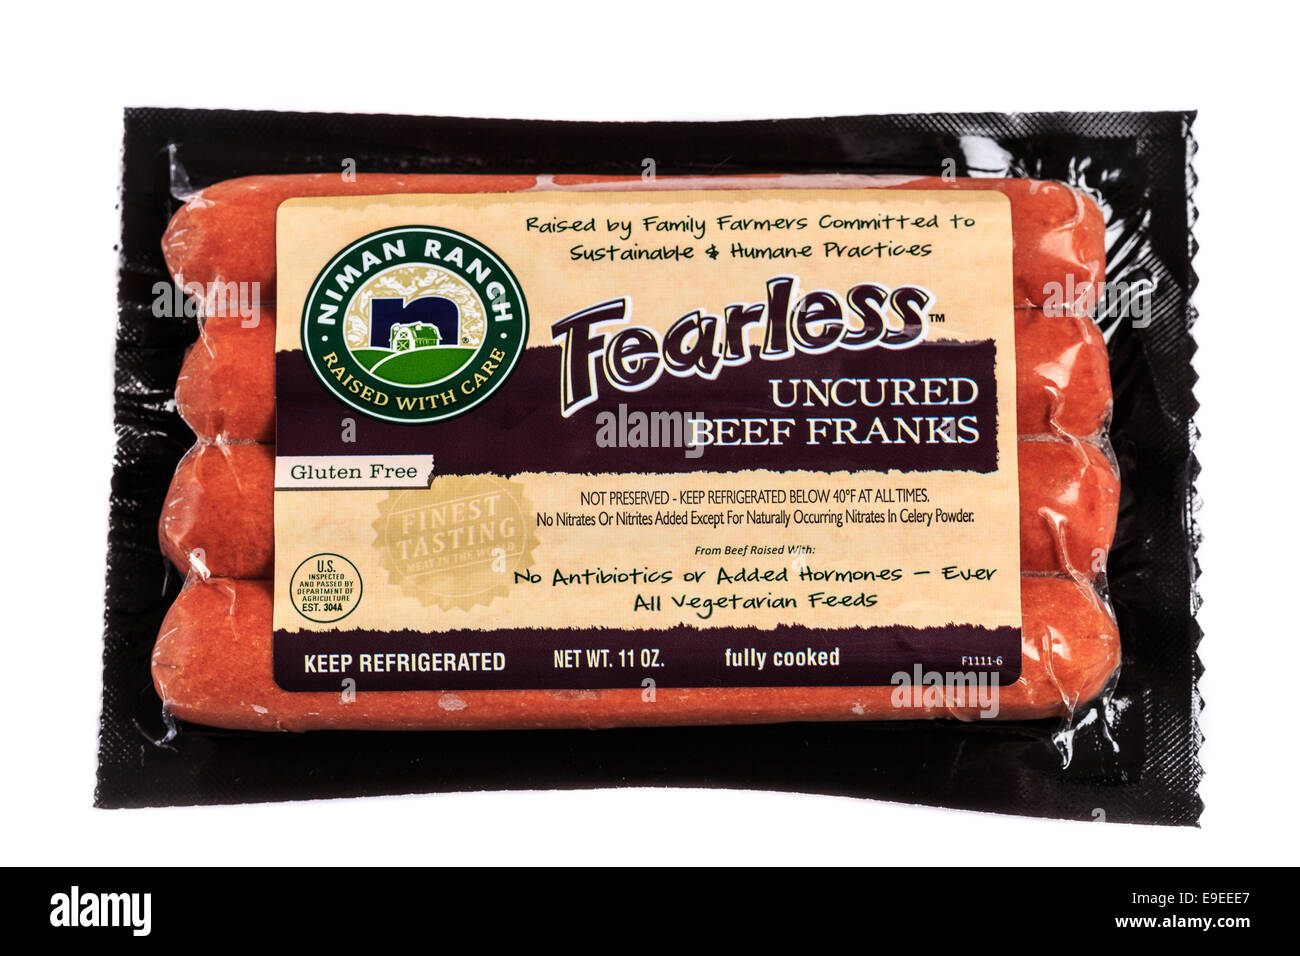 Niman Ranch Brand Fearless Uncured Beef Franks Stock Photo